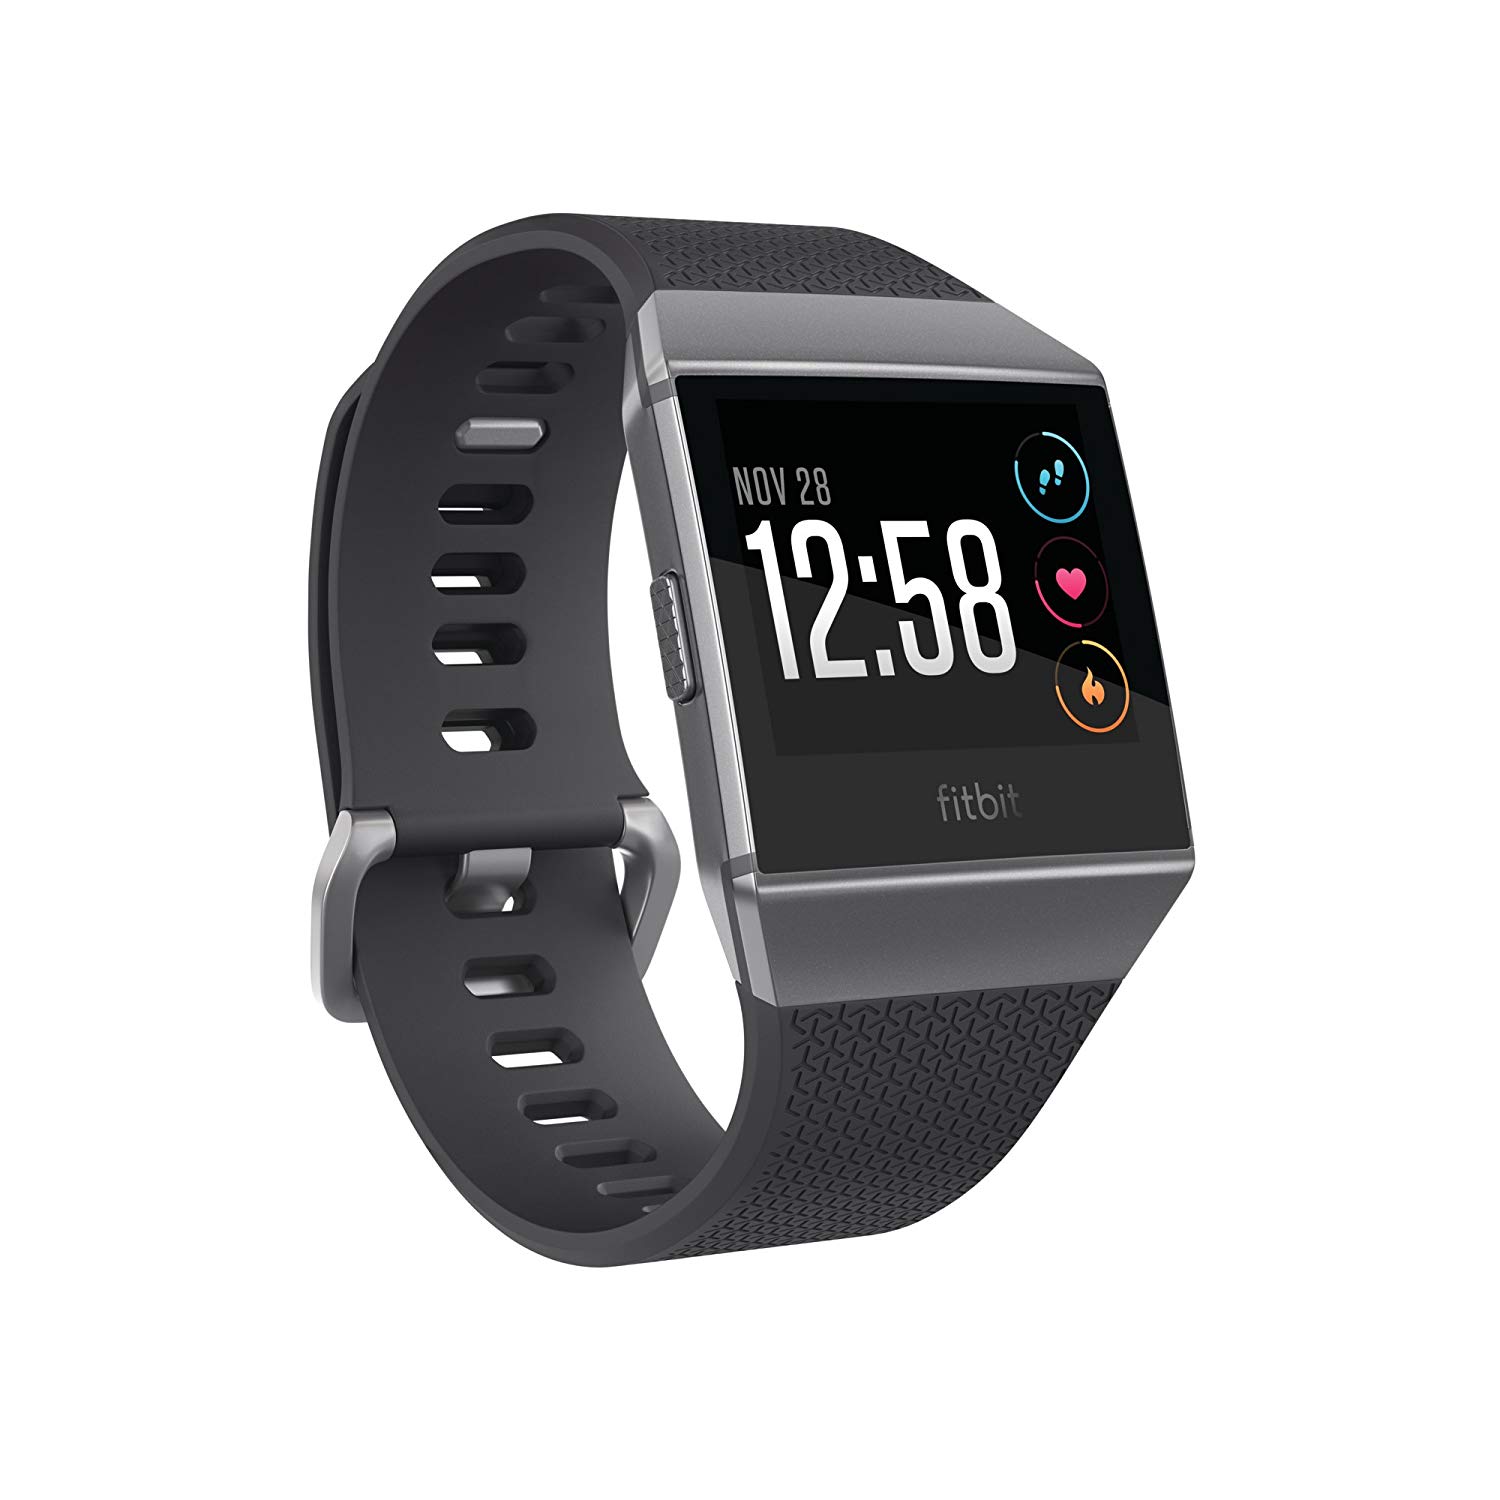 The Best Smart Watches and Fitness Trackers To Buy Right Now - Maxim